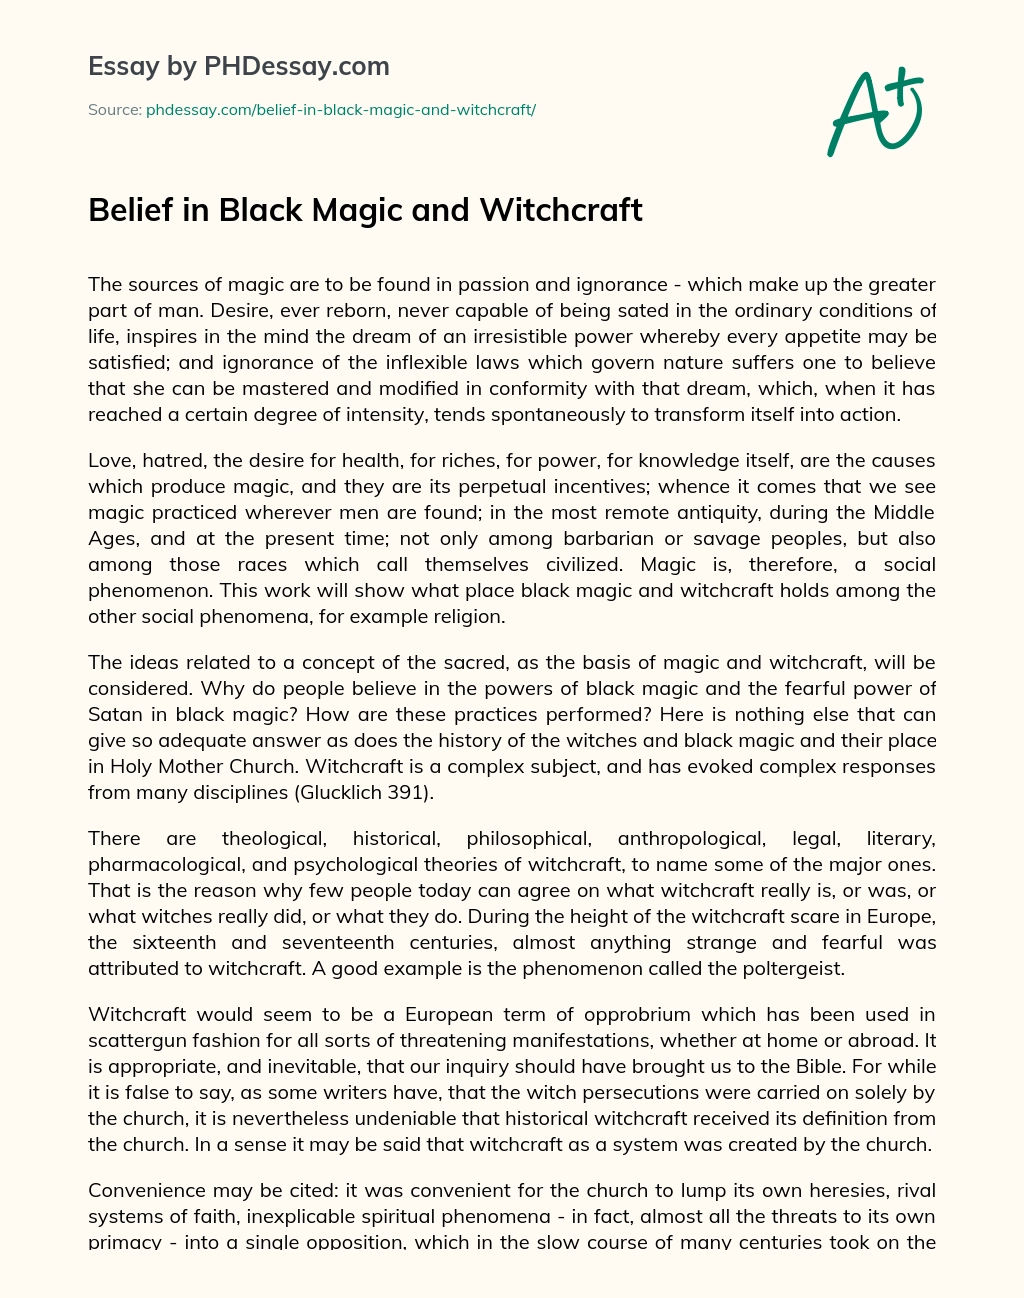 Belief in Black Magic and Witchcraft essay